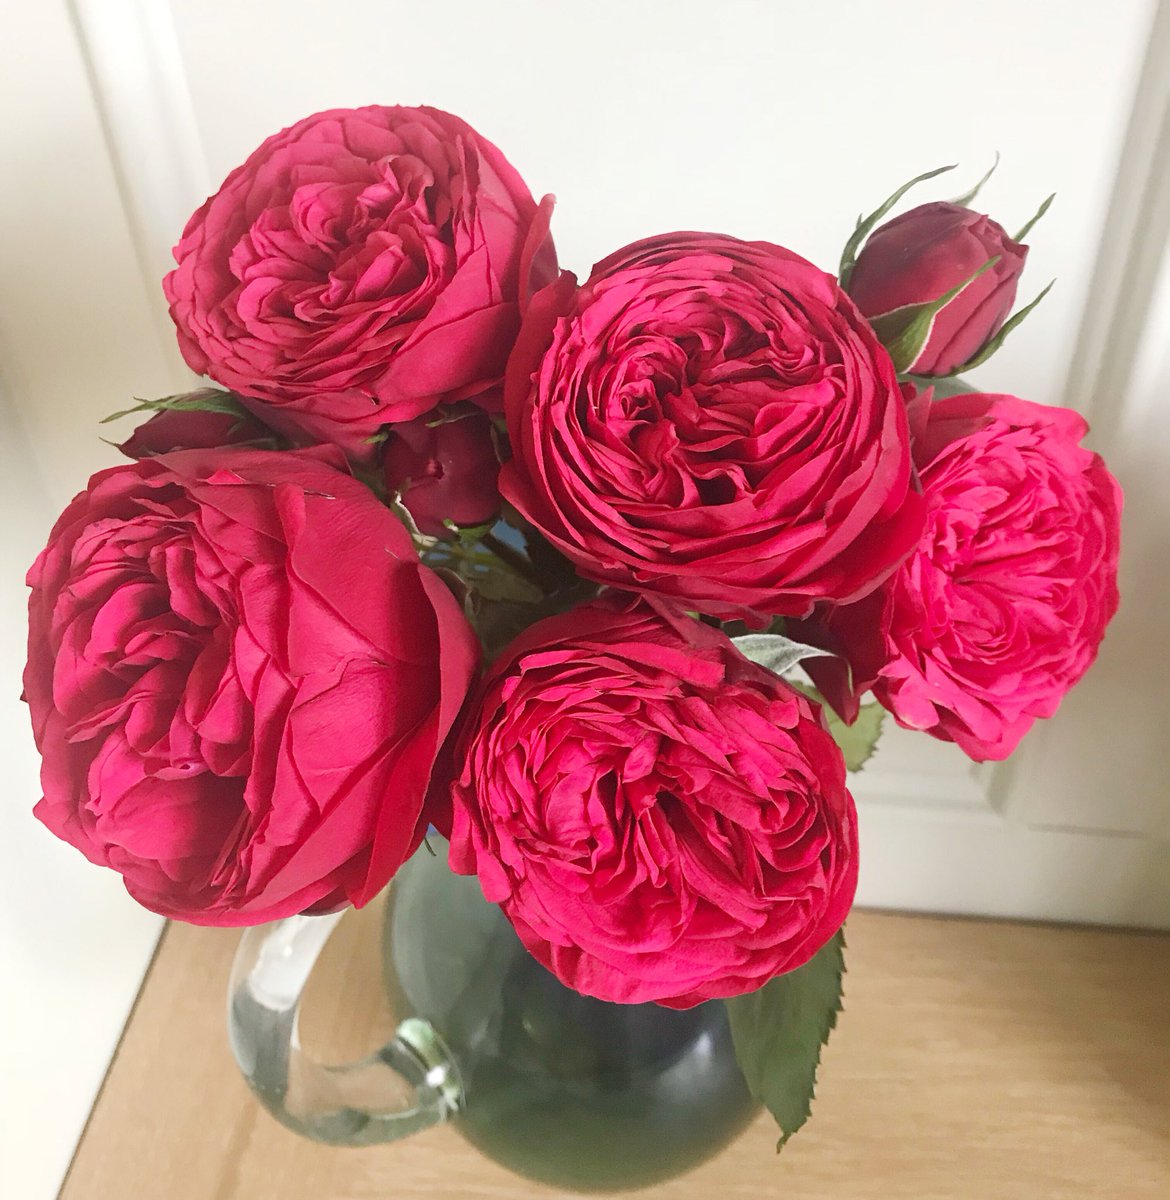 Swoon😍over these gorgeous roses! ...... it has been a crazy week but I can finally sit down tonight with a glass of wine or two and admire these beauties 🌺 

#floralstyling #fineartflowers #sharingtheflorallove #forflowerlovers #inspiredbypetals #florist #stives #weddingflowers